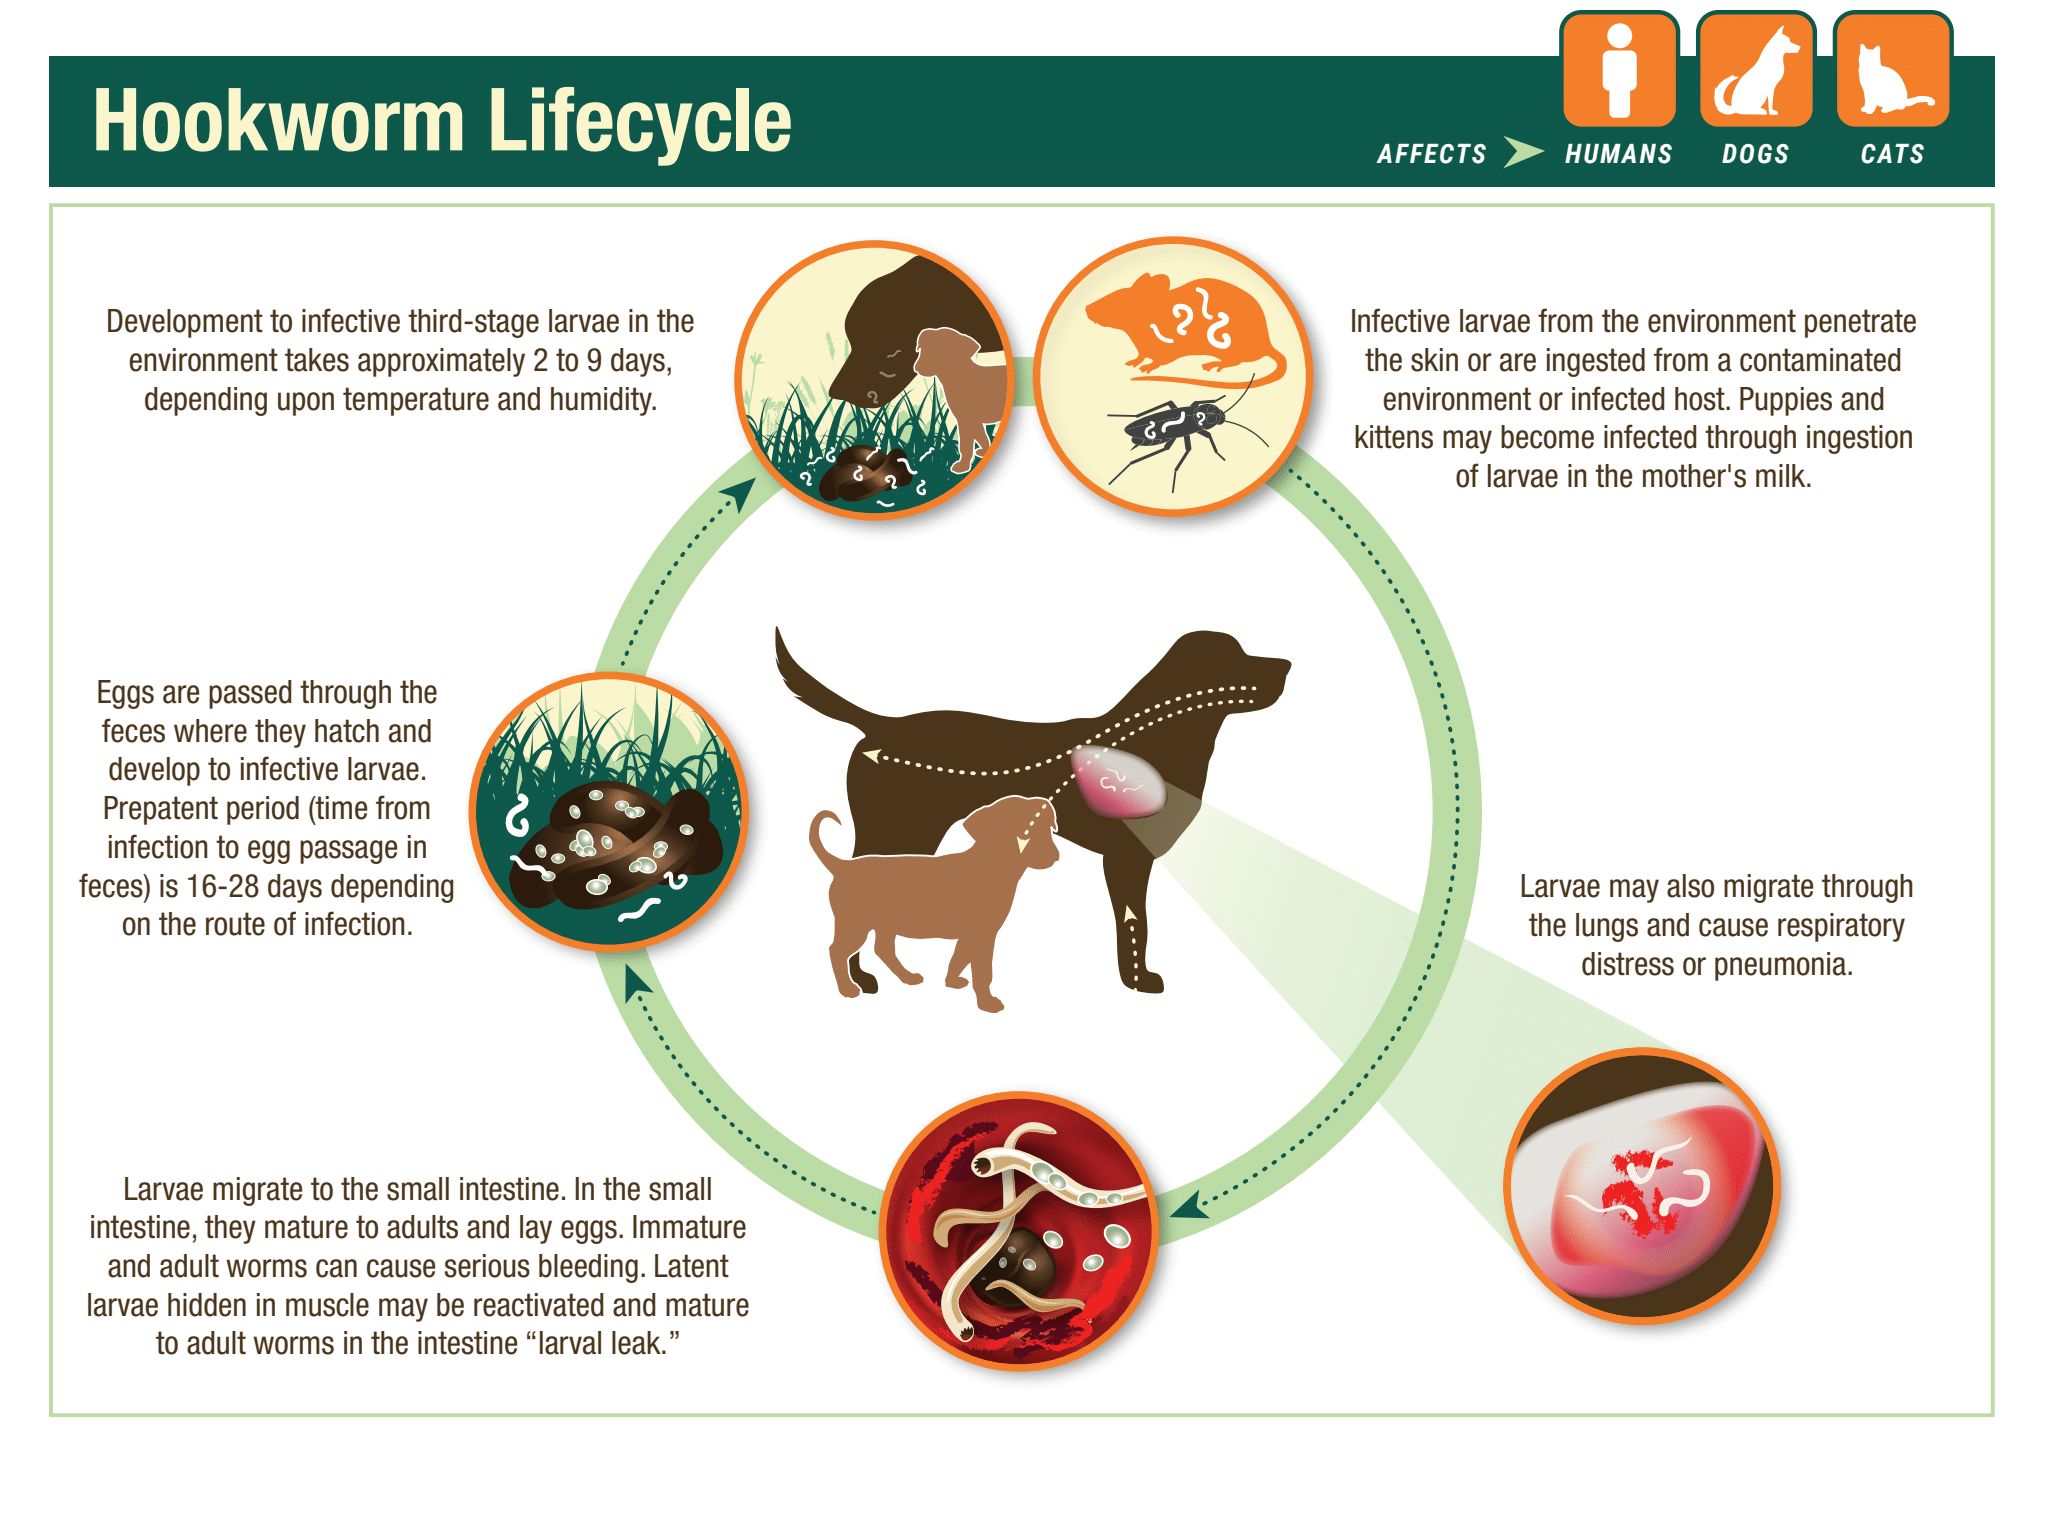 CAPC on X: CAPC recommends testing all dogs for hookworms by